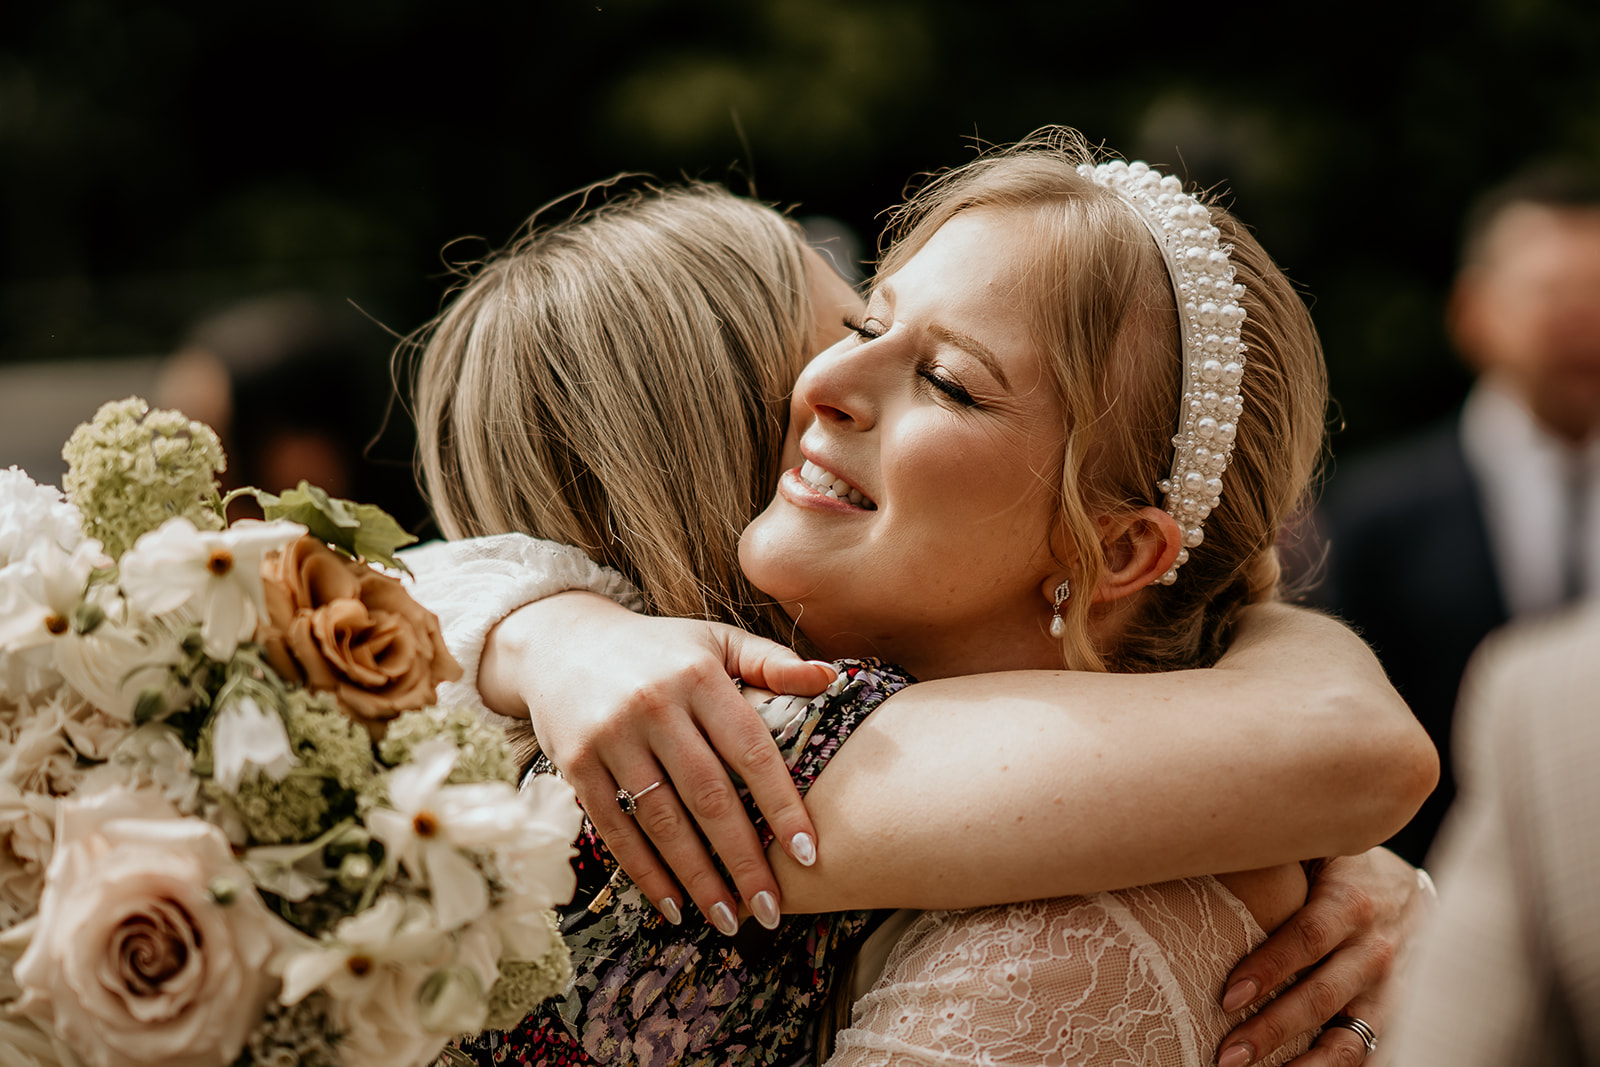 cuddle with the bride on the wedding day